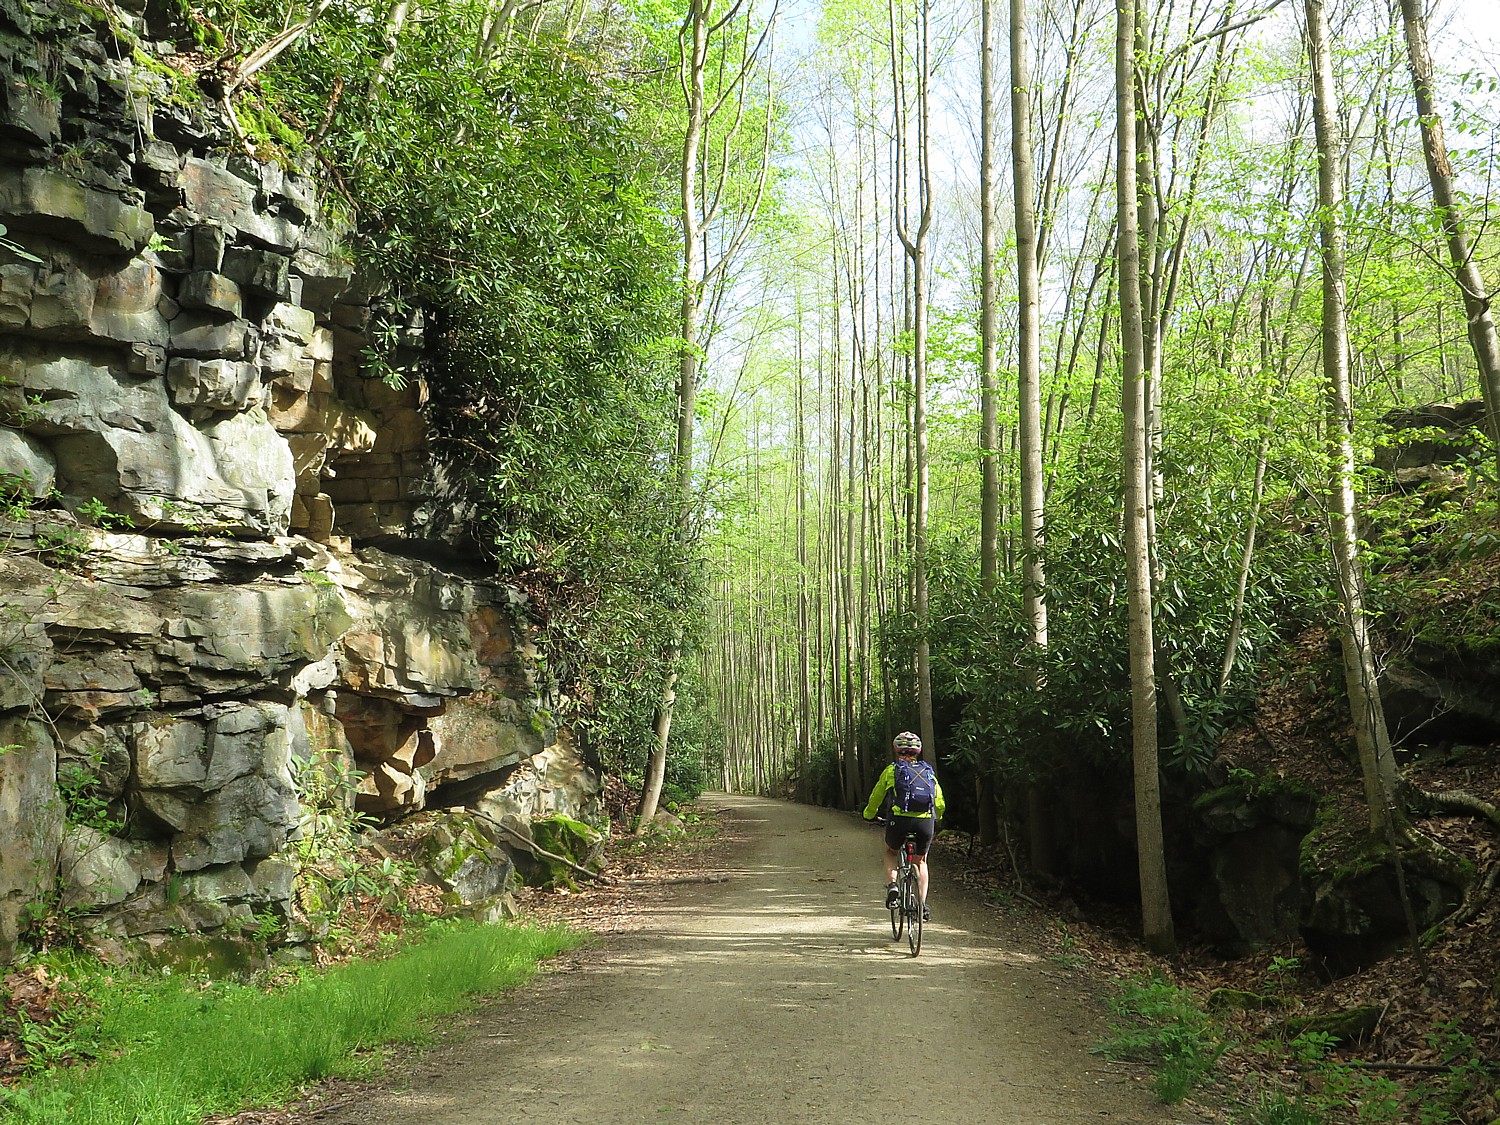 Biking the Great Allegheny Passage rail-trail, Confluence to Adelaide, PA on Rails-to-Trails’ spring sojourn © 2016 Karen Rubin/goingplacesfarandnear.com.